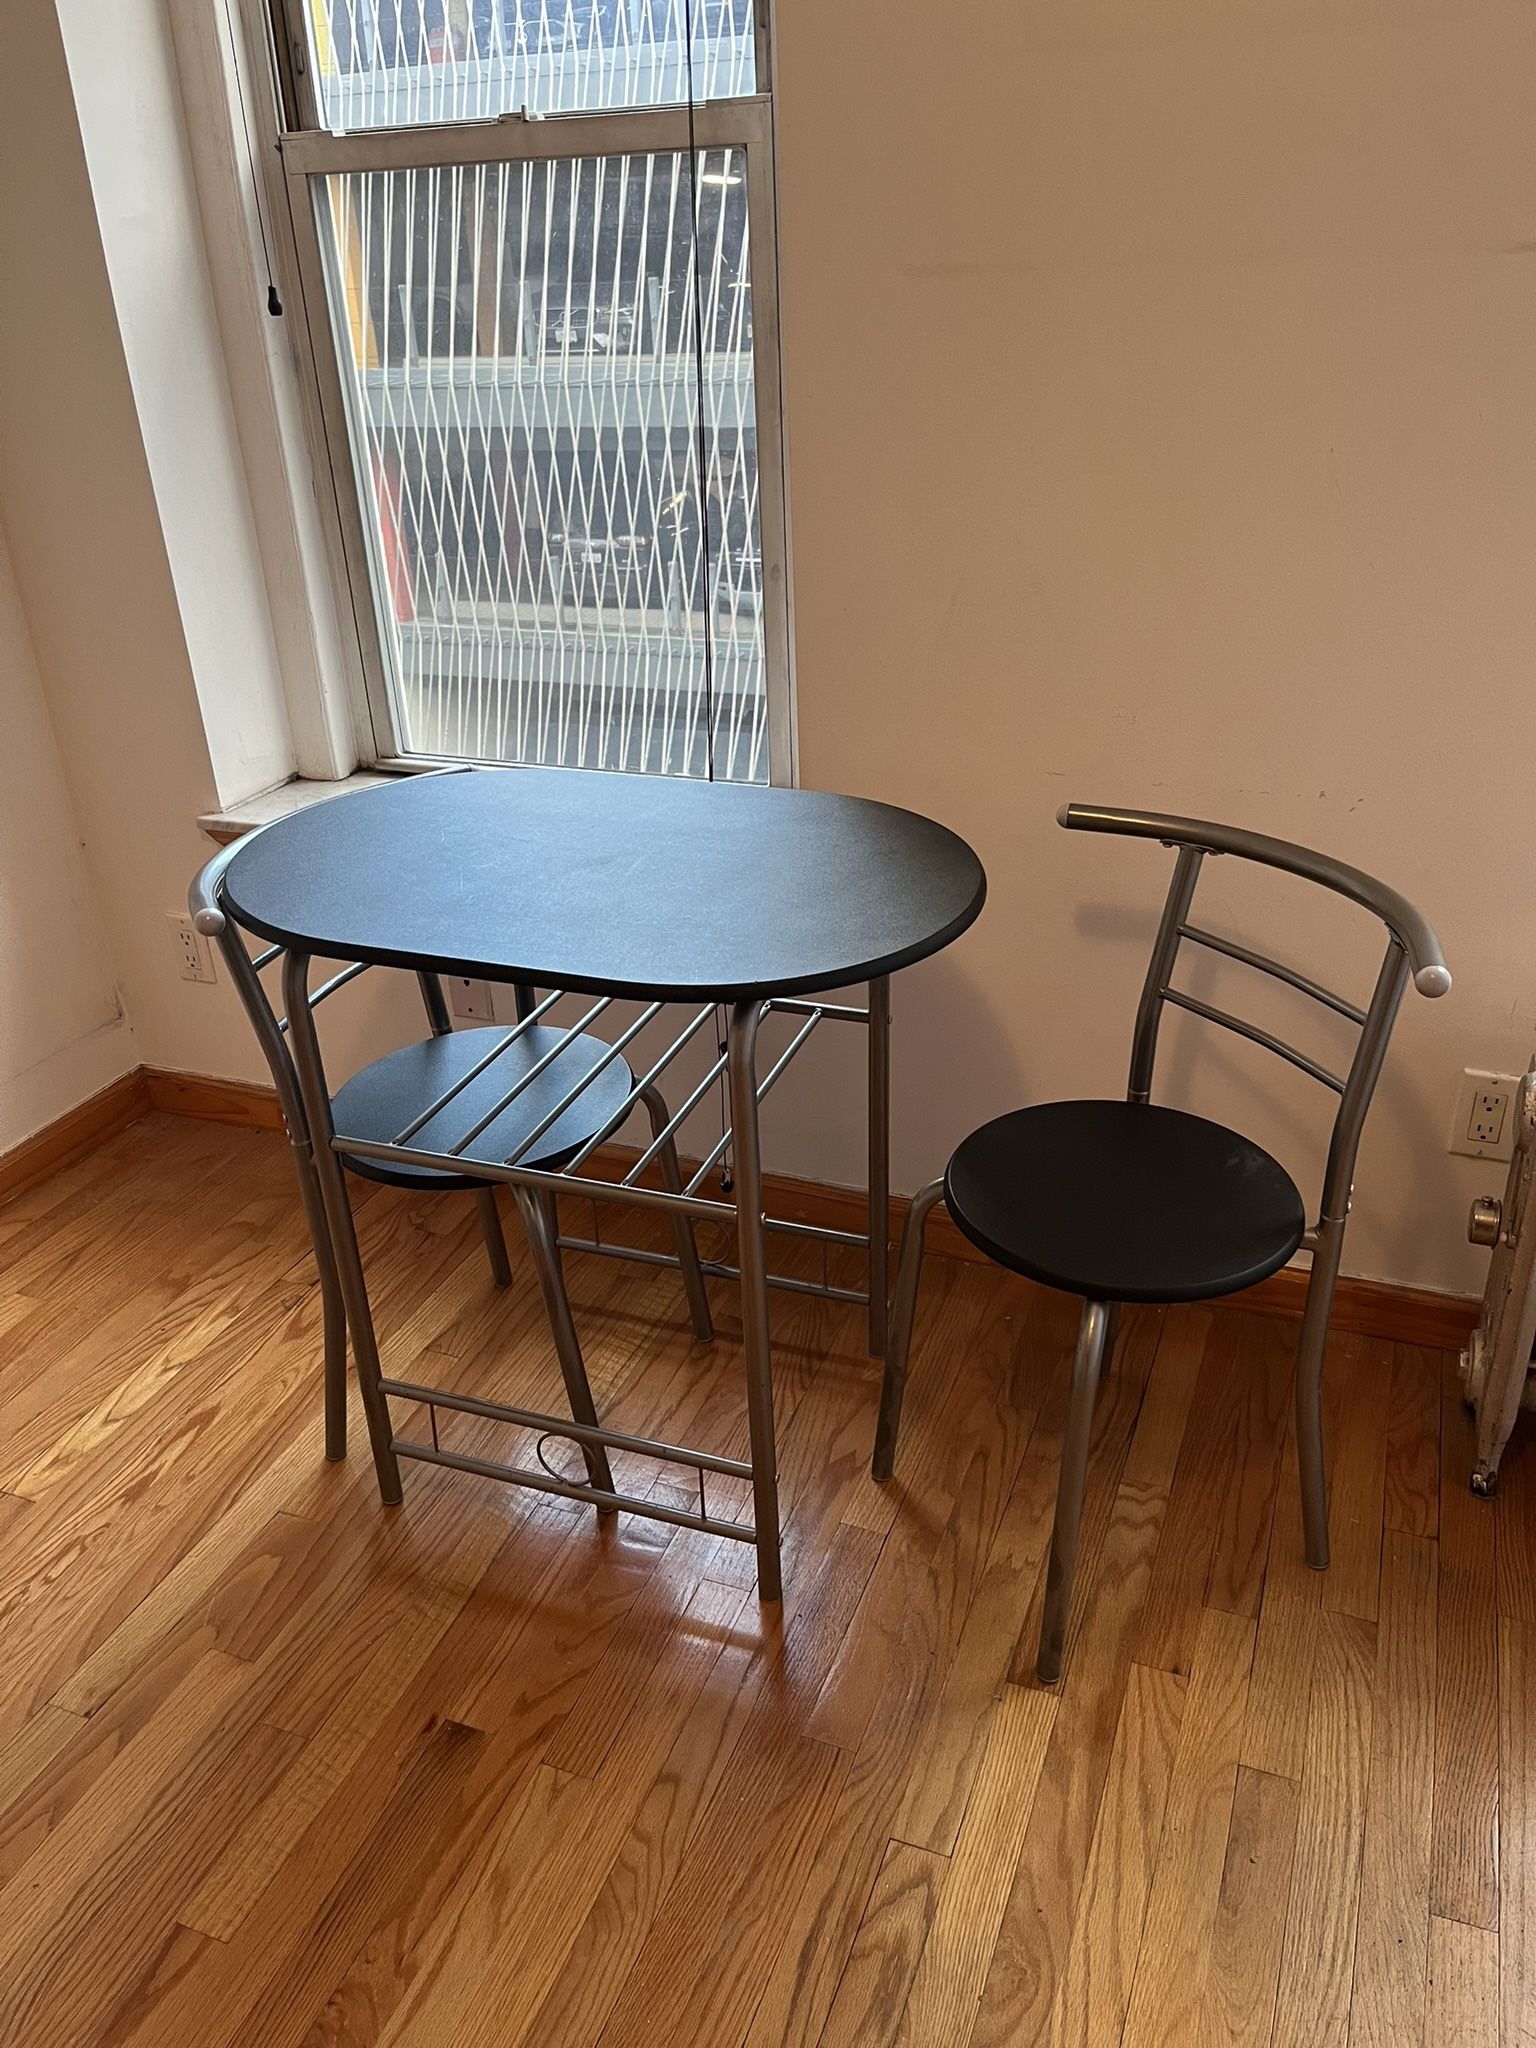 Dining Table and Two Chairs